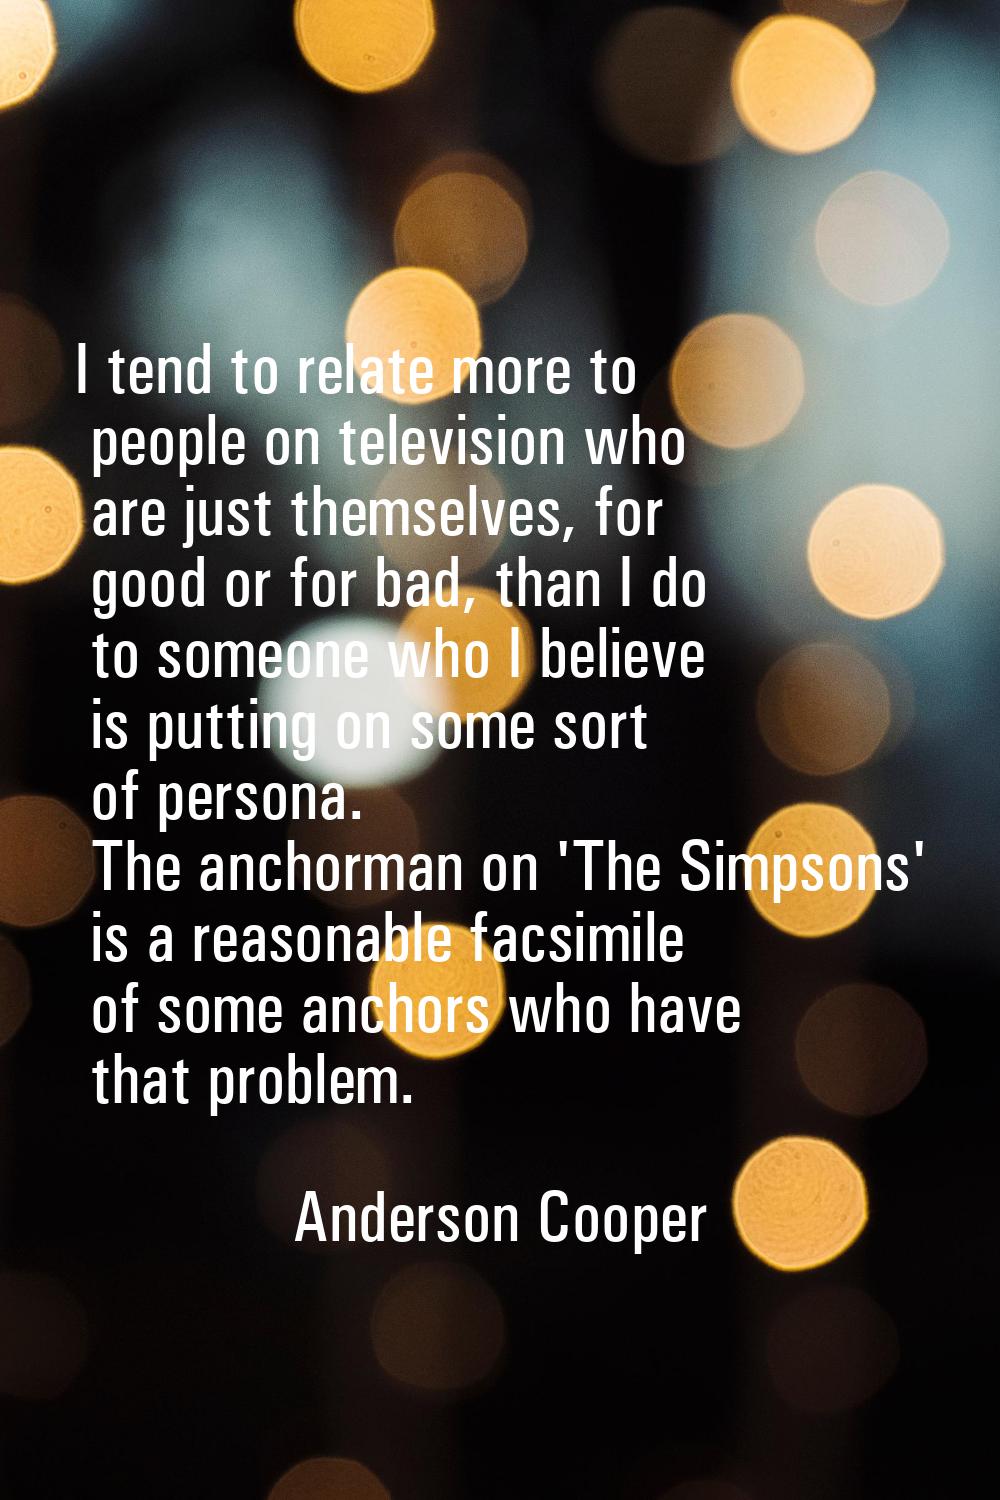 I tend to relate more to people on television who are just themselves, for good or for bad, than I 